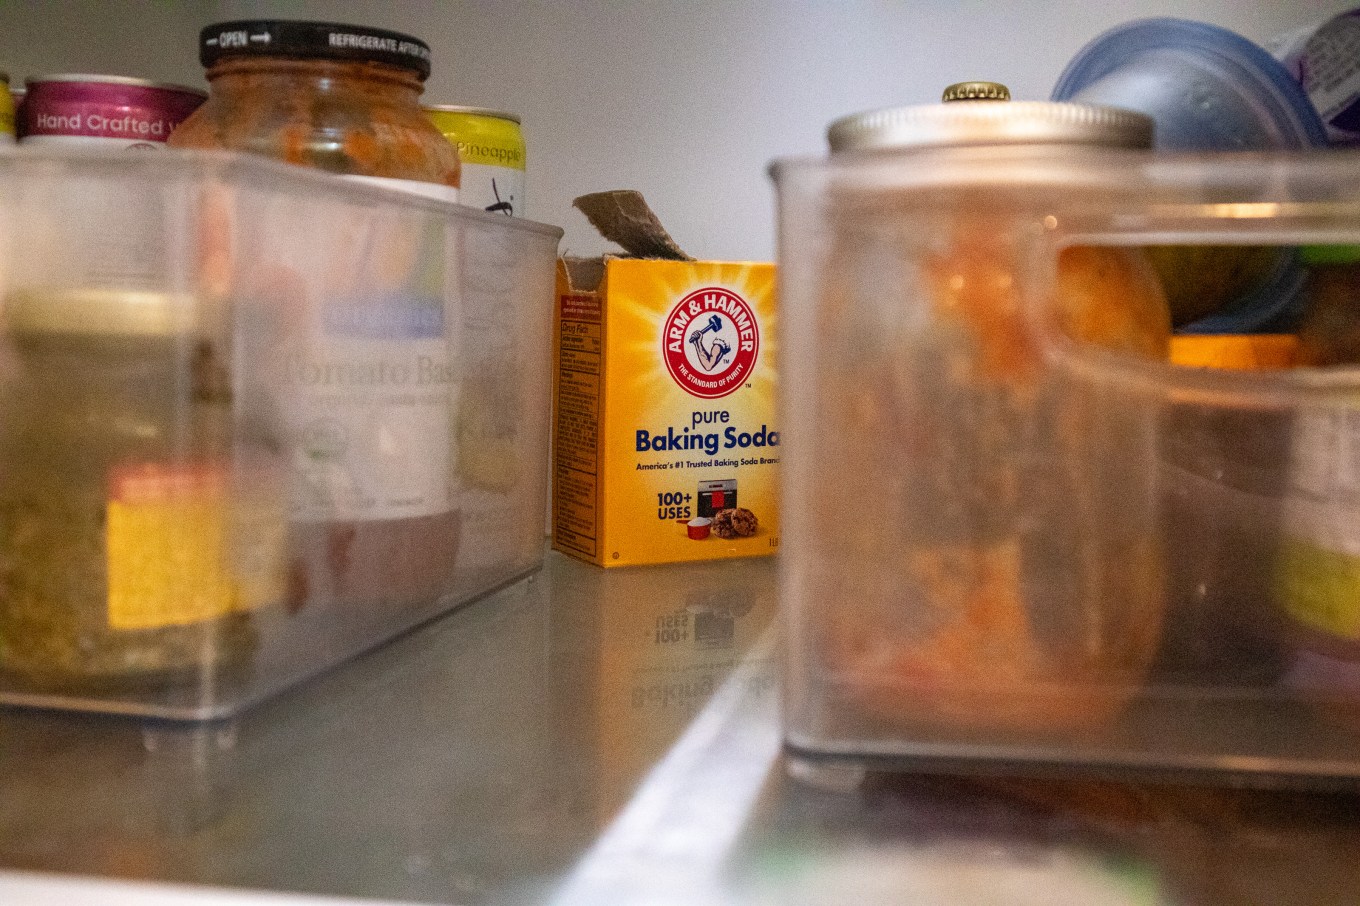 Baking soda placed in a refrigerator or fridge to eliminate strong smells.